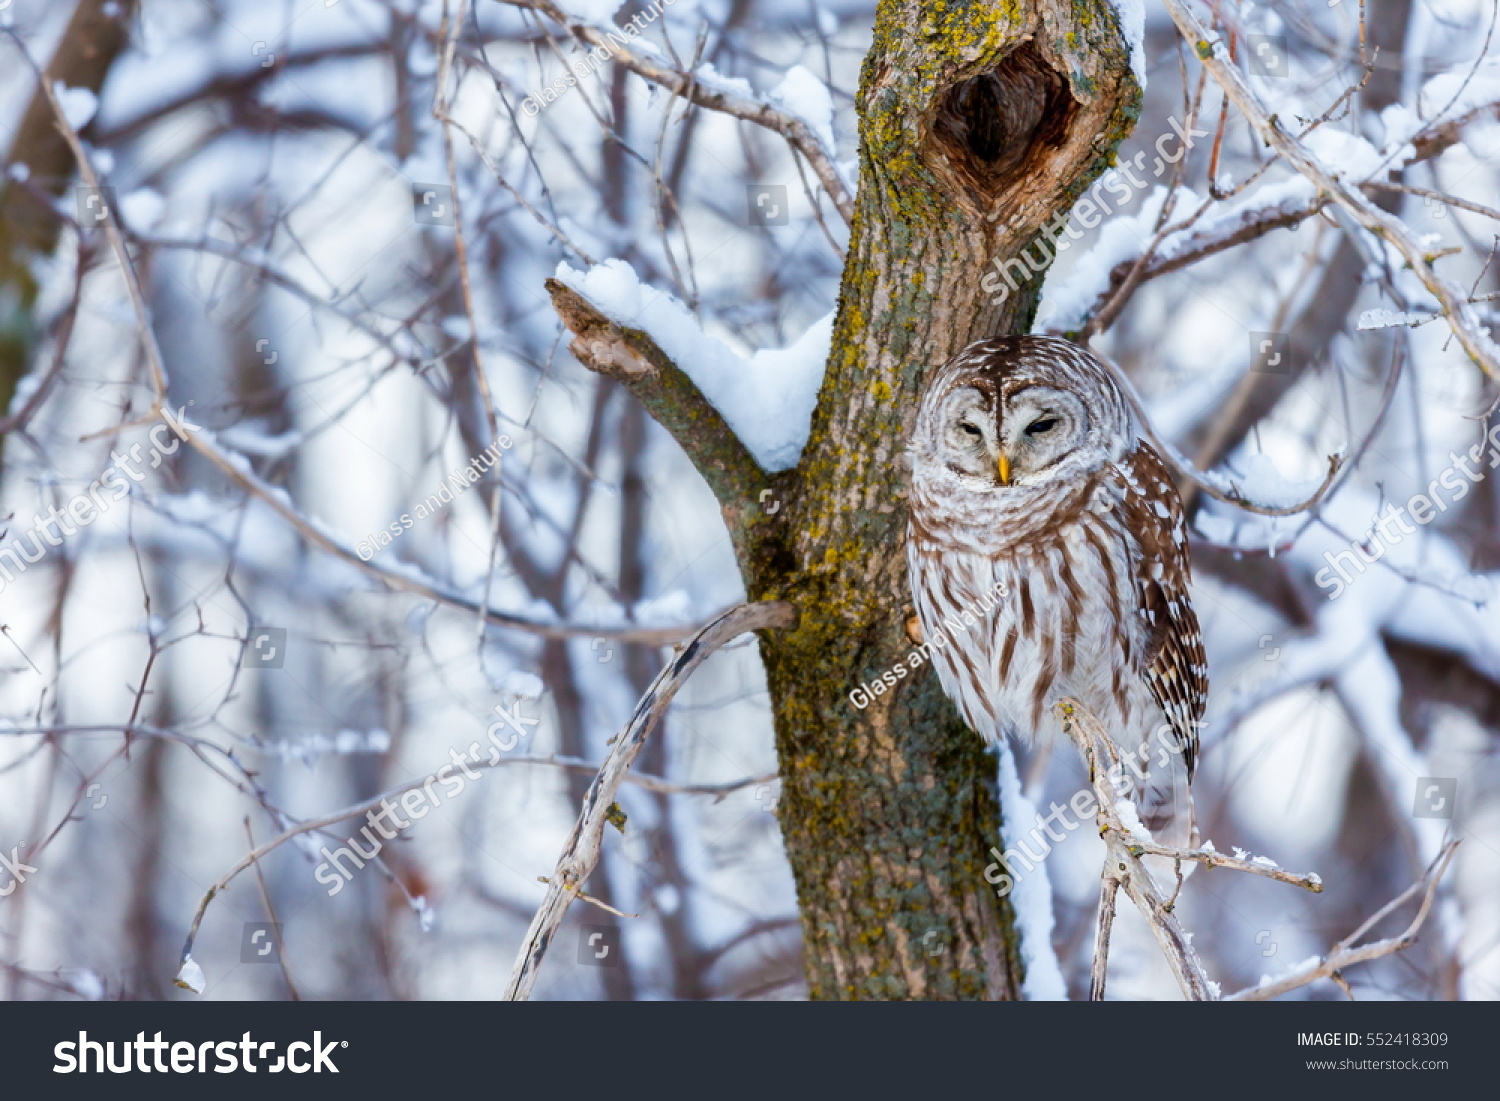 The barred owl is a large typical owl native to North America. Best known as the hoot owl for its distinctive call, it goes by many other names, including eight hooter, rain, wood  and striped owl.  #552418309